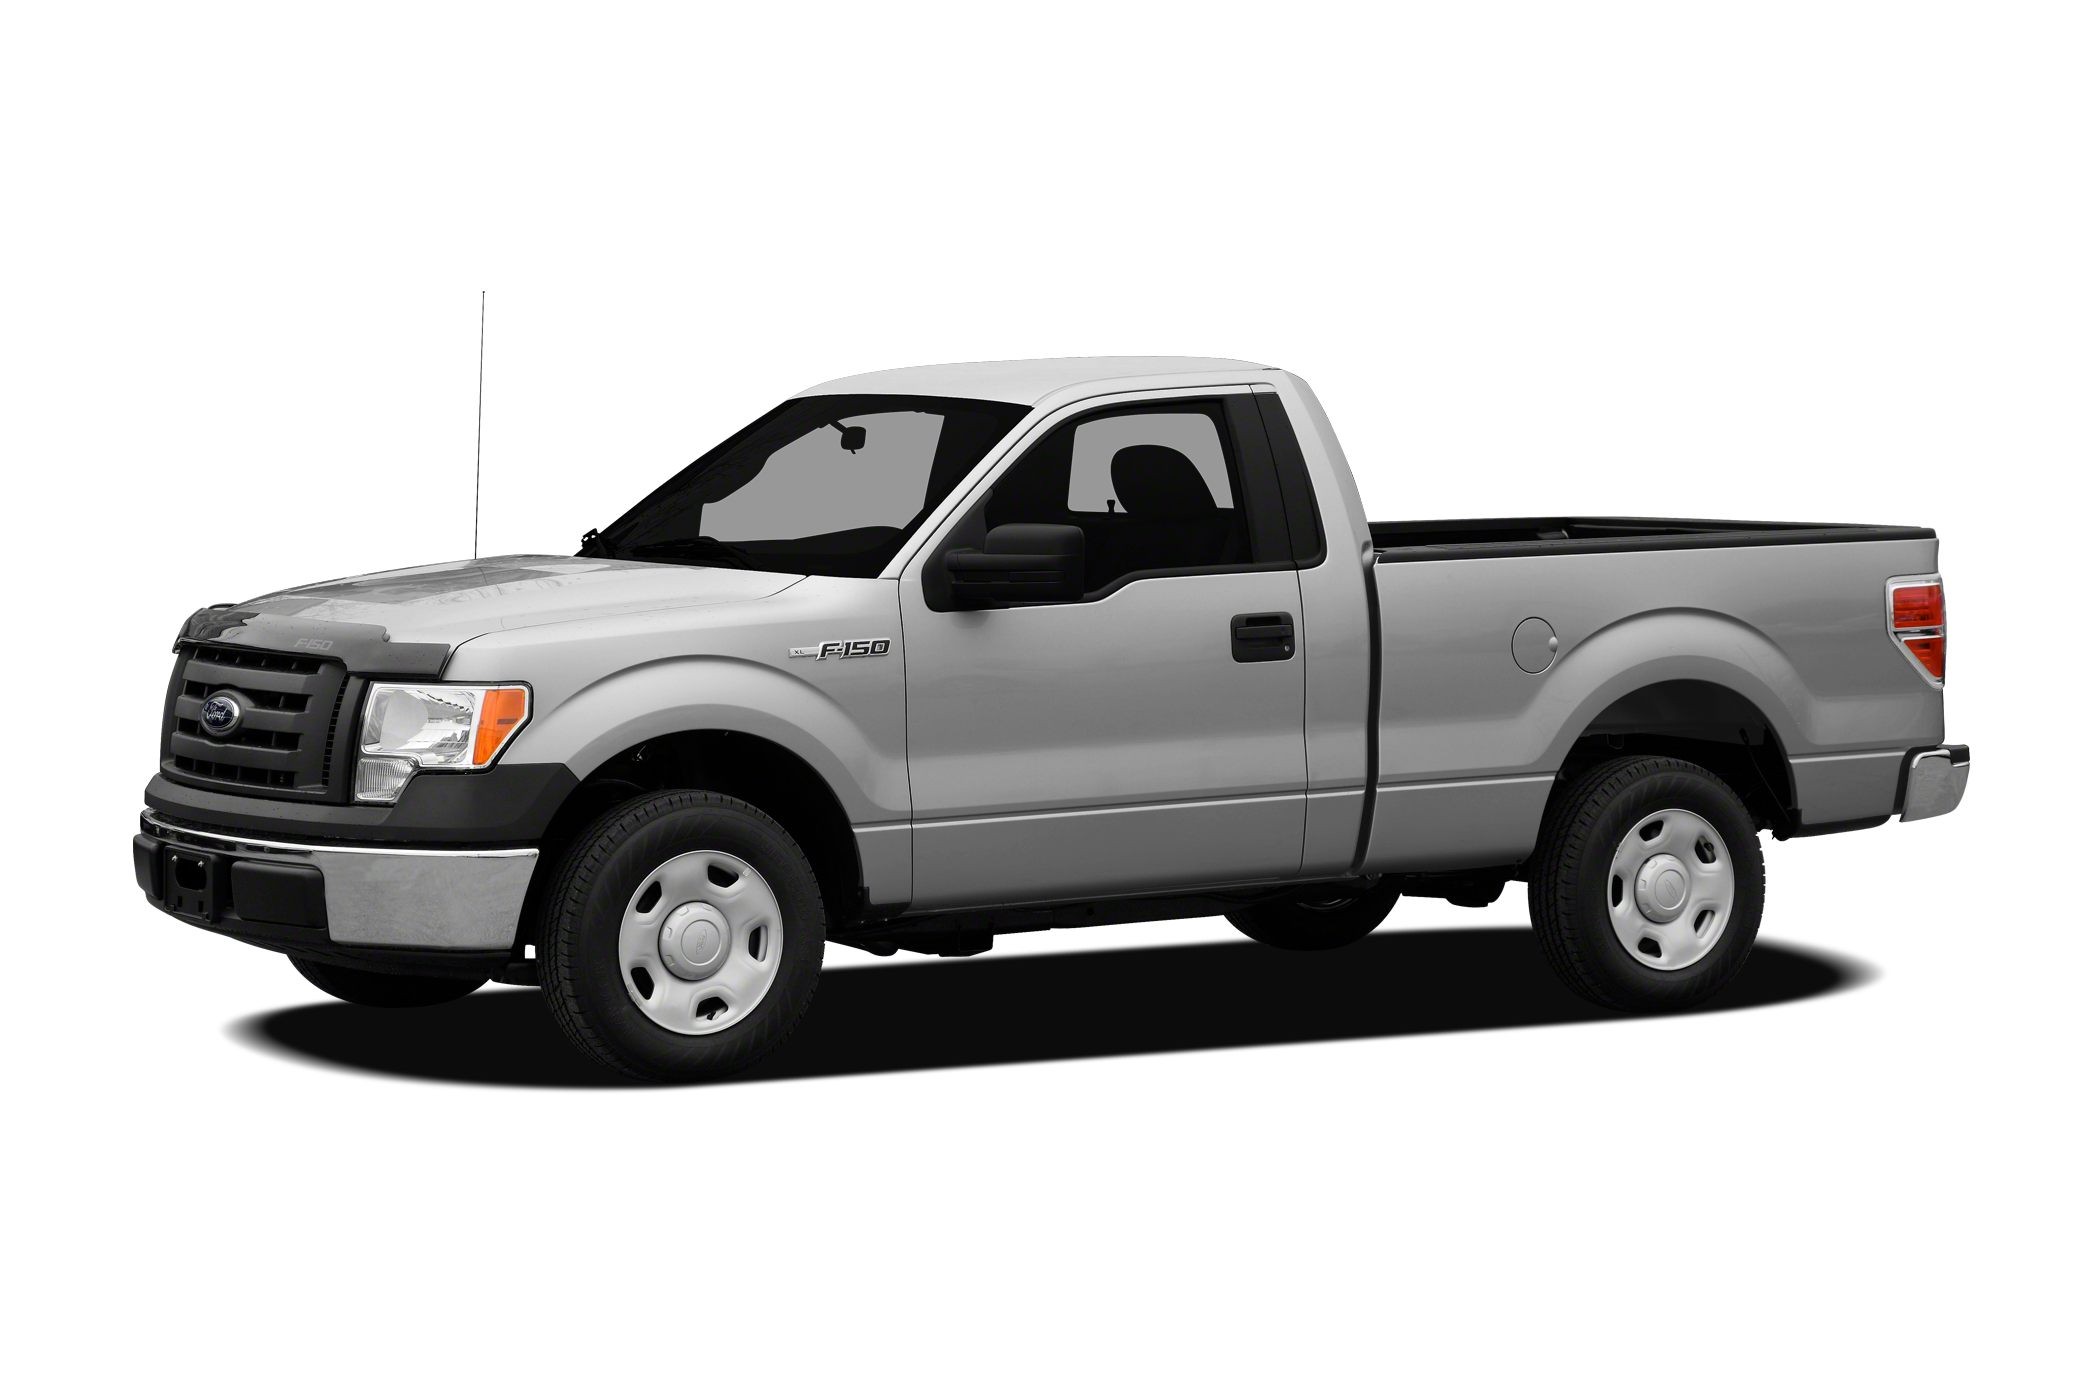 2003 ford F150 4 6 Engine Diagram 2012 ford F 150 Specs and Prices Of 2003 ford F150 4 6 Engine Diagram